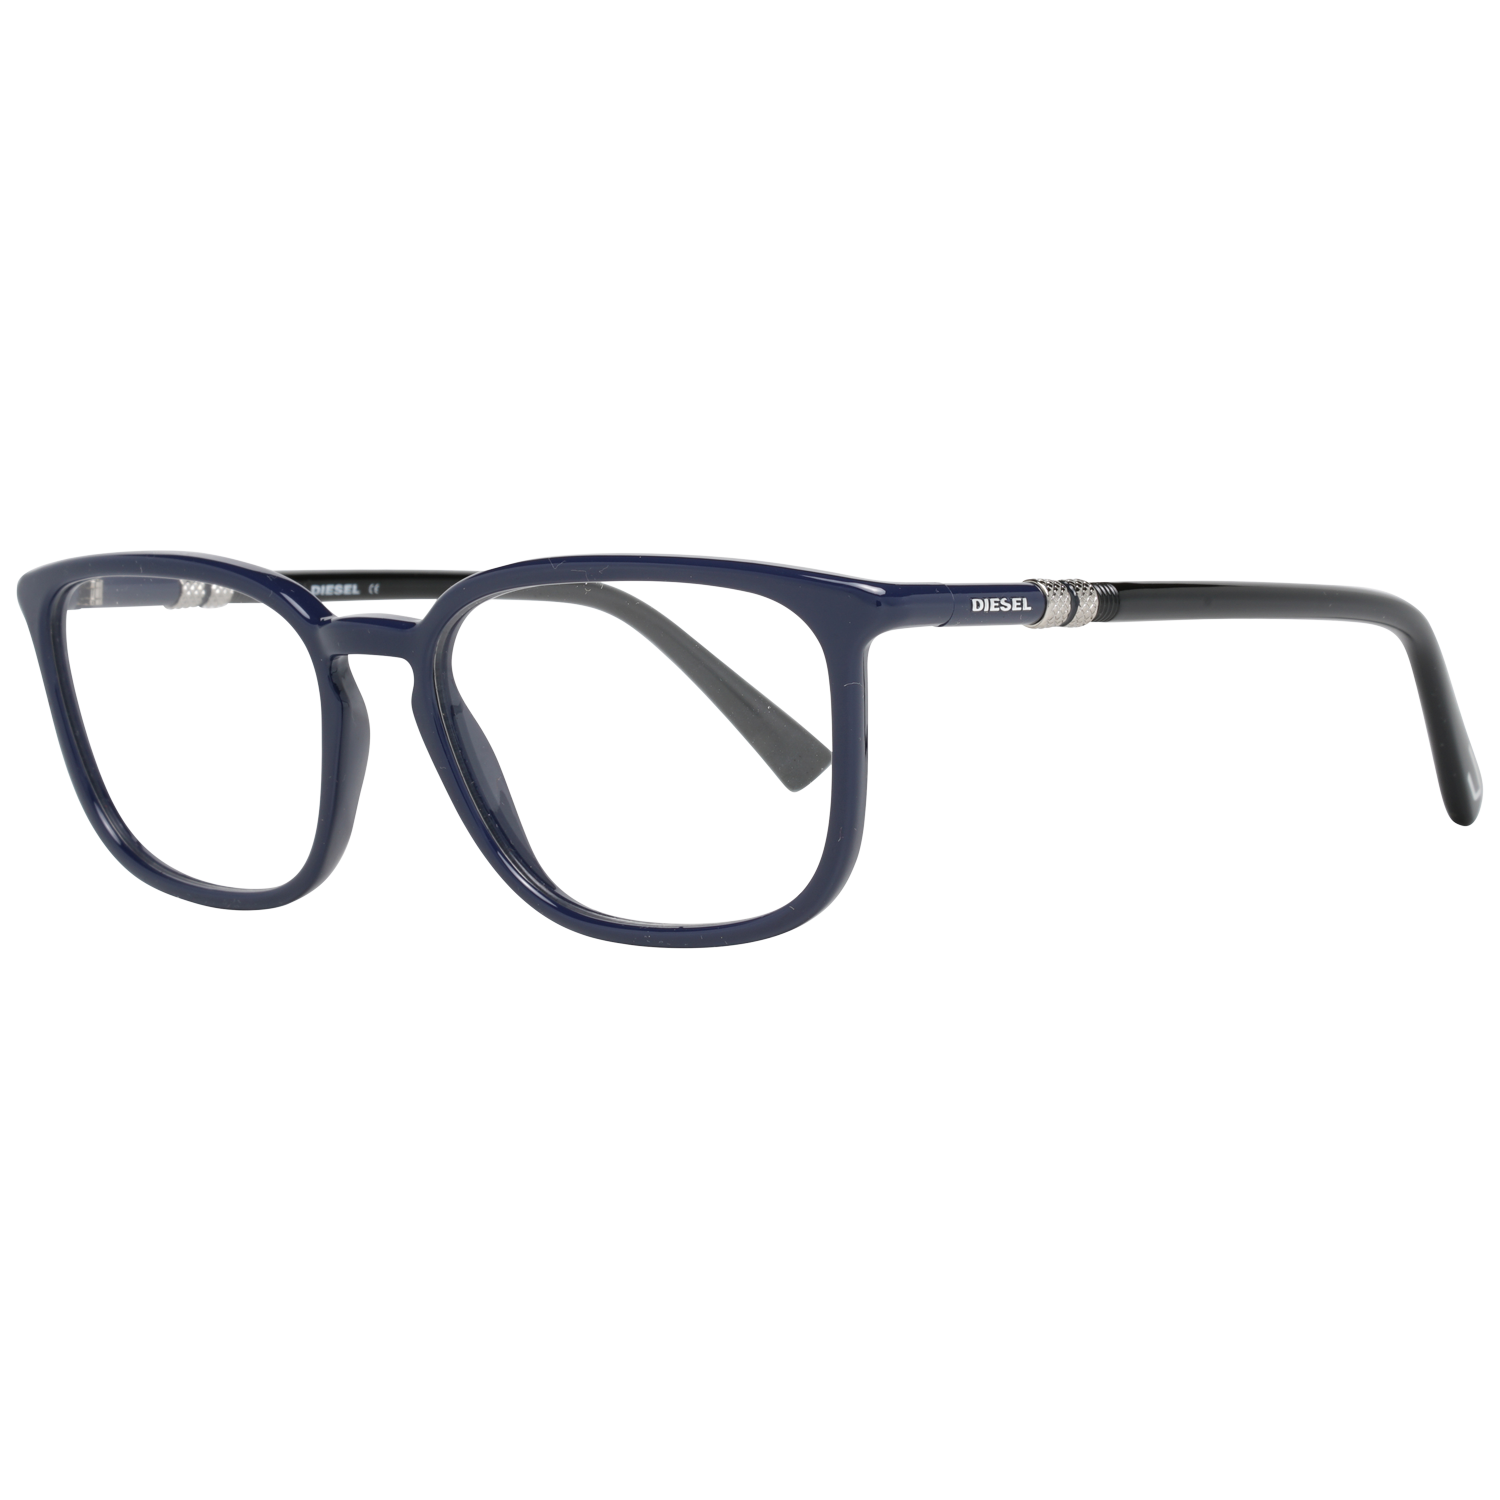 GenderMenMain colorBlueFrame colorBlueFrame materialPlasticSize55-17-145Lenses width55mmLenses heigth40mmBridge length17mmFrame width140mmTemple length145mmShipment includesCase, Cleaning clothStyleFull-RimSpring hingeNoExtraNo extra